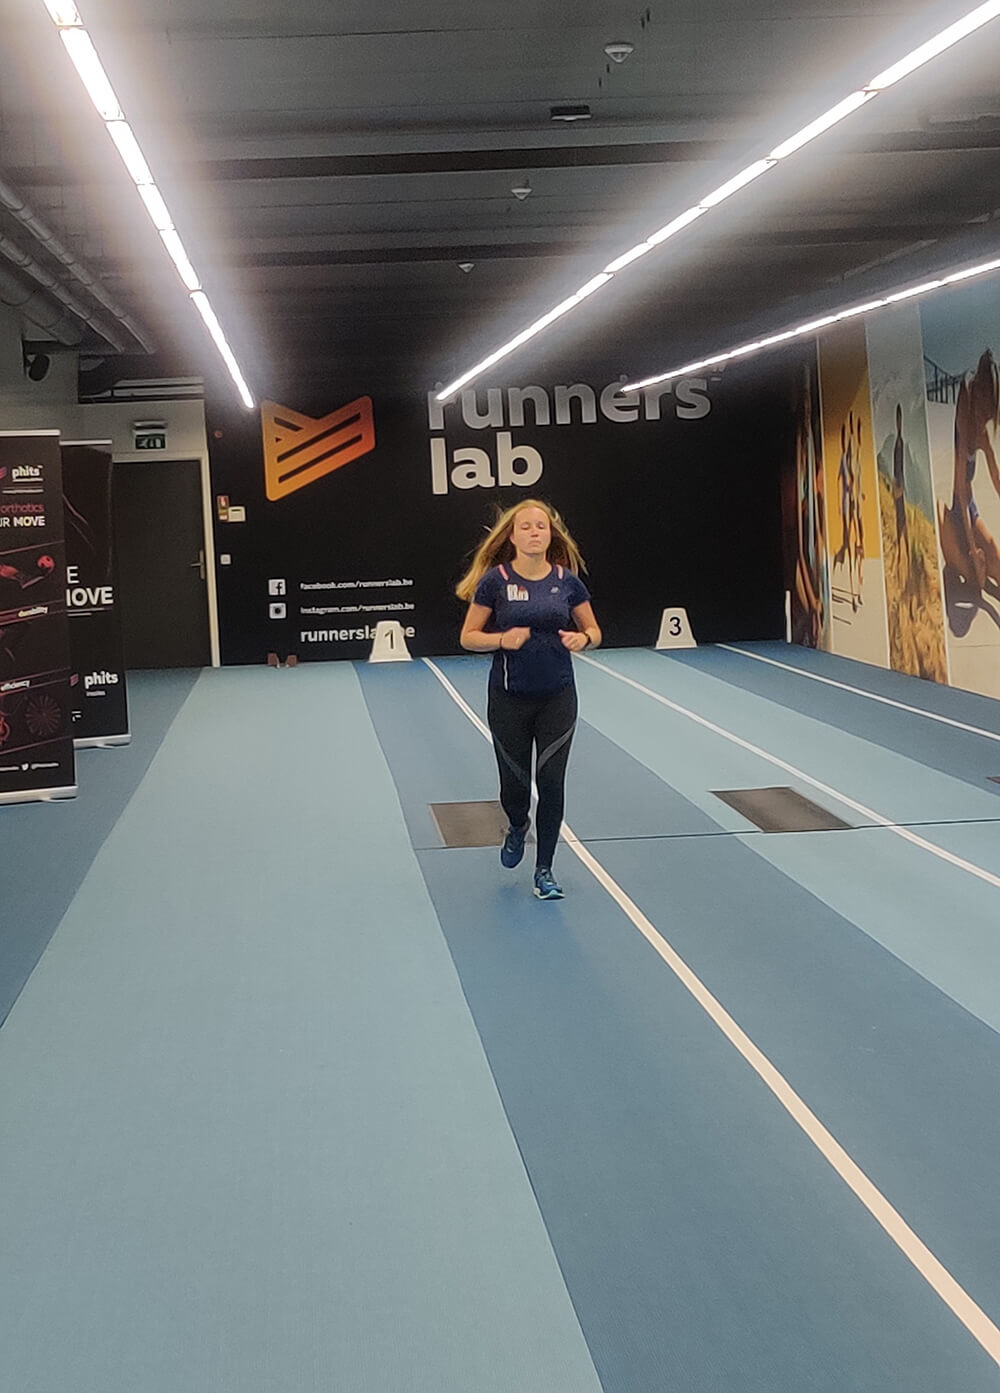 Runners'lab